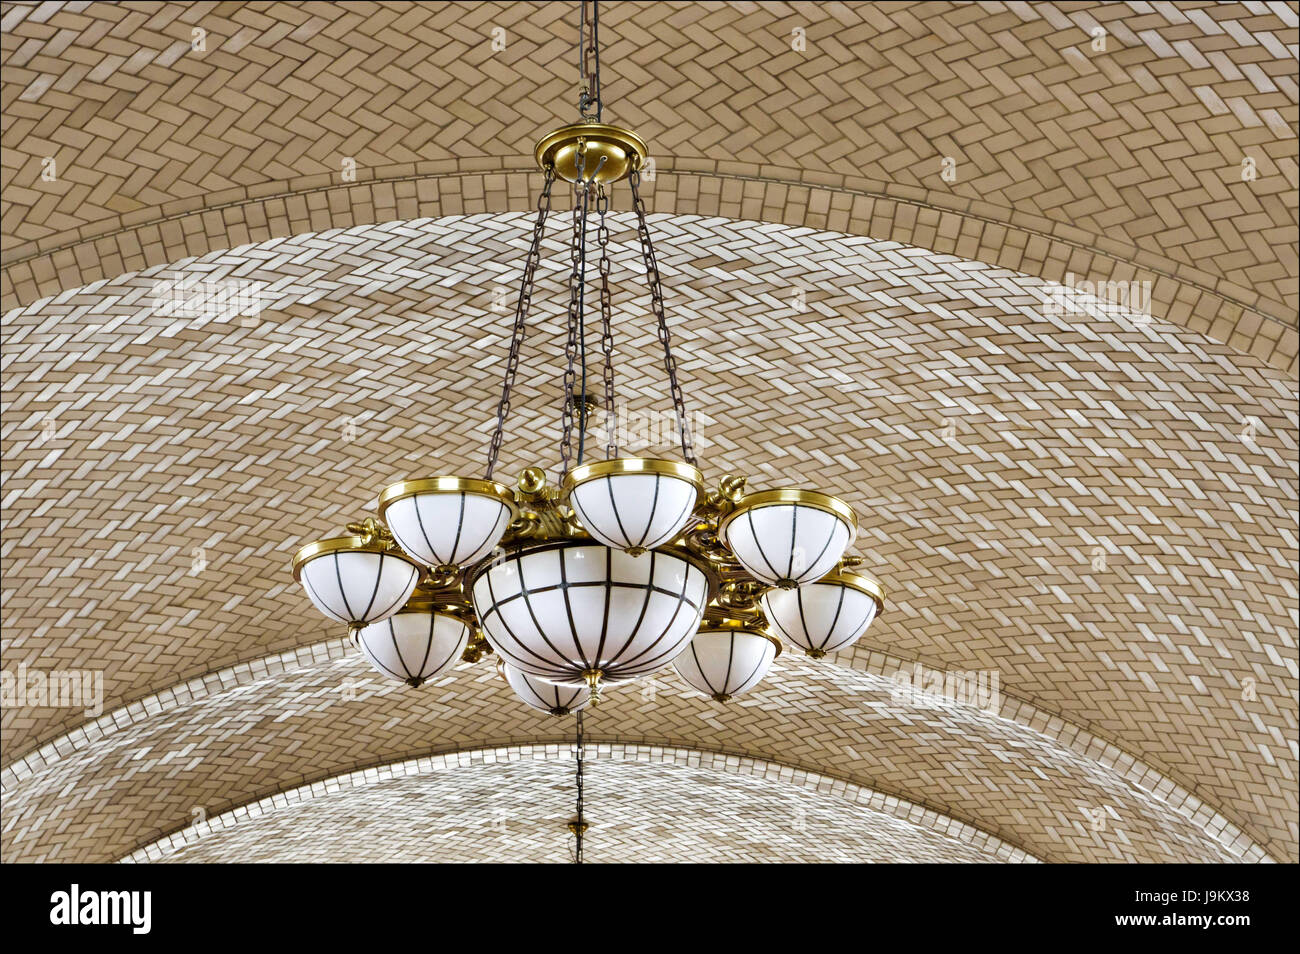 chandelier at immigration museum, ellis island, new york, usa Stock Photo